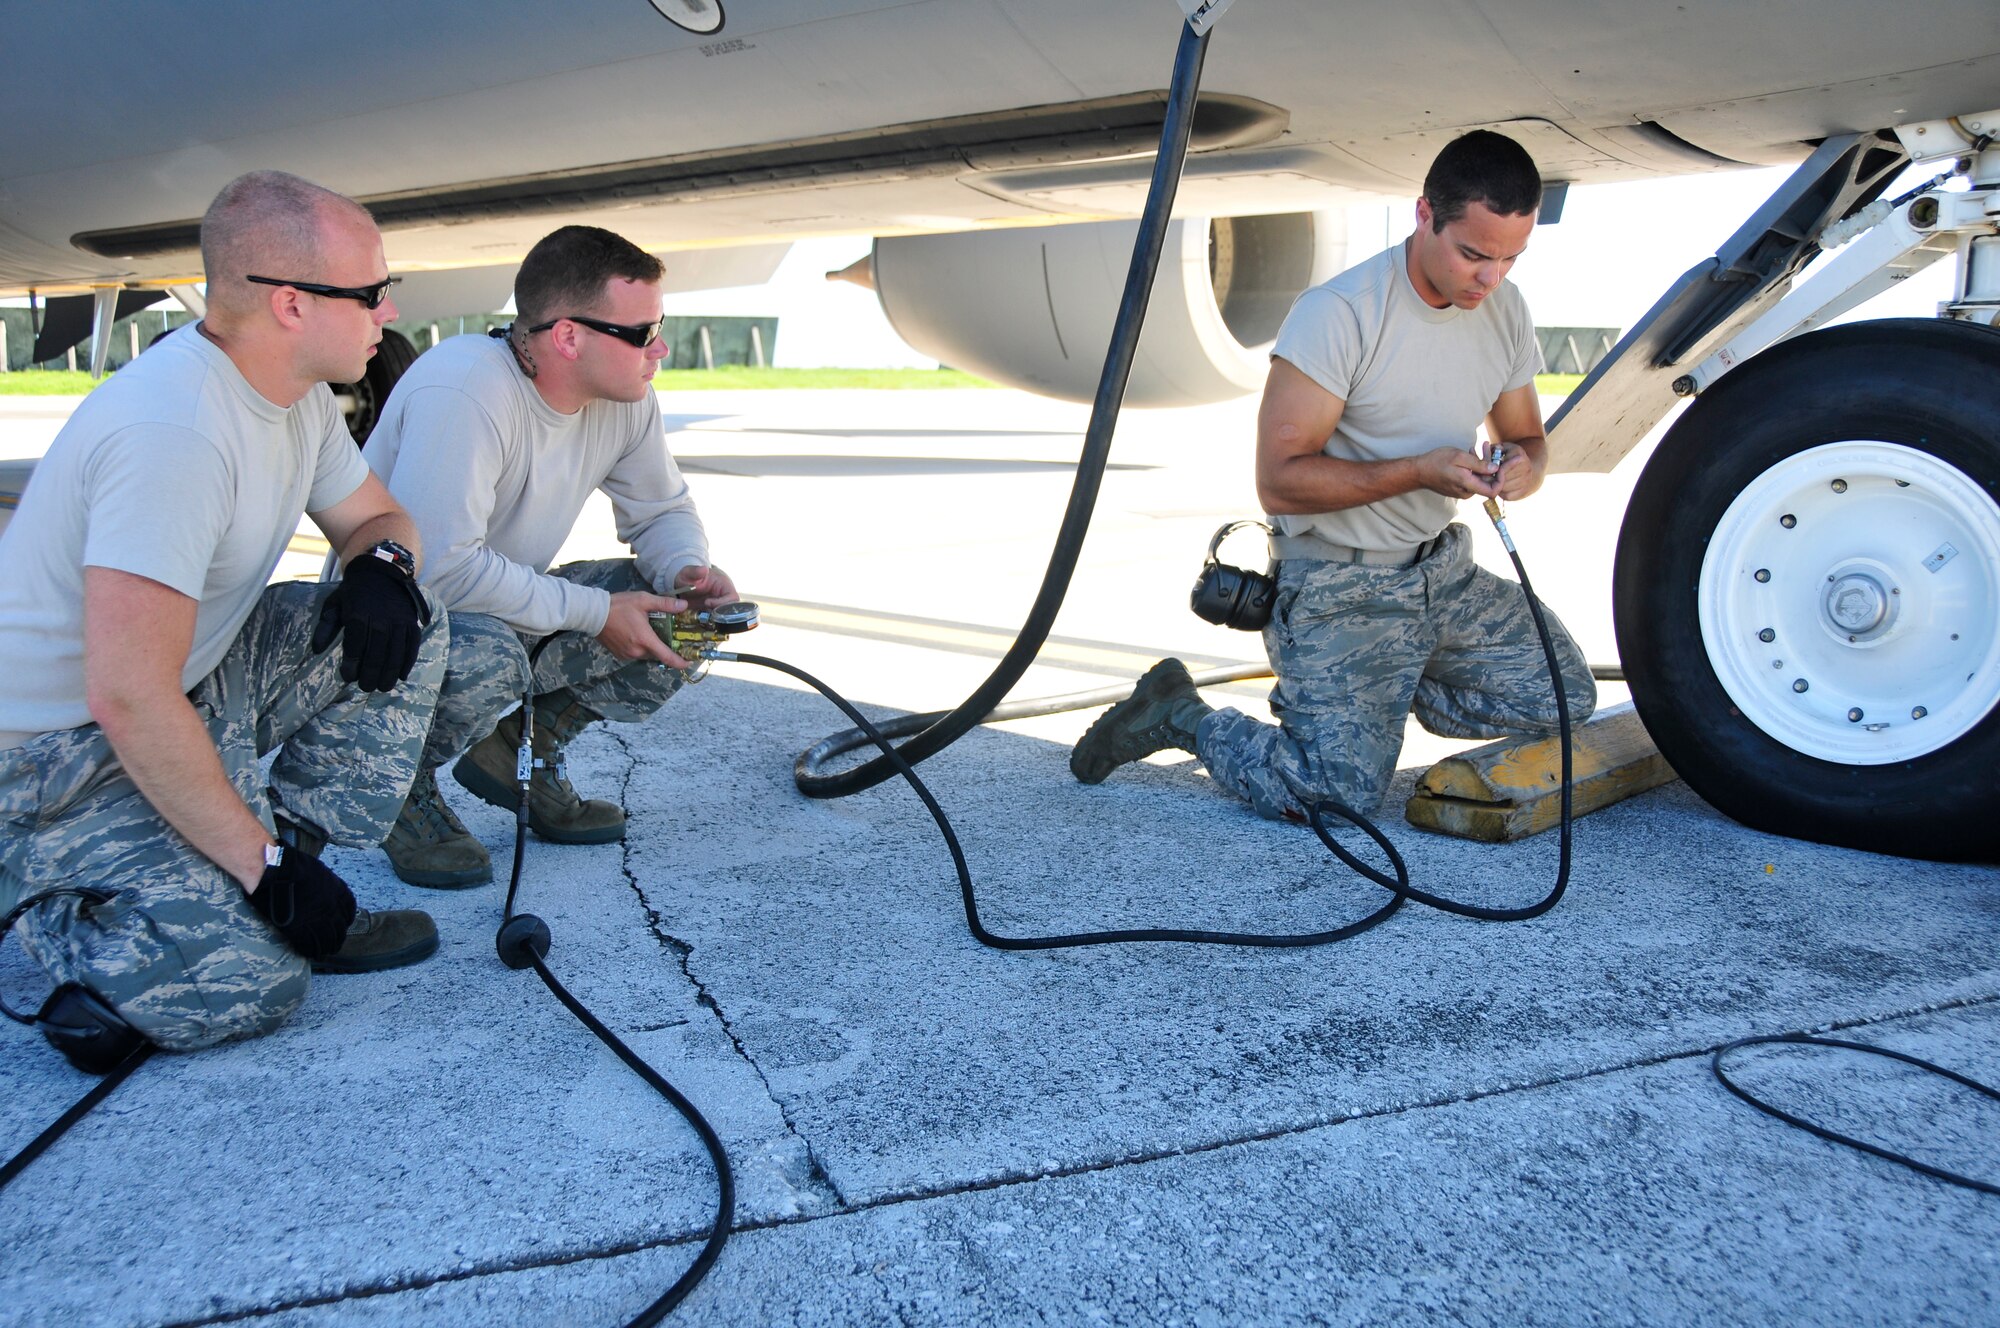 Aircraft Maintainers from the 134th Air Refueling Wing, McGhee Tyson ANG Base, TN check the tire pressure on a KC-135R Stratotanker refueling aircraft at Andersen AFB, Guam during a training mission.  (U.S. Air National Guard photo by Staff Sgt. Ben Mellon, 134 ARW Public Affairs)